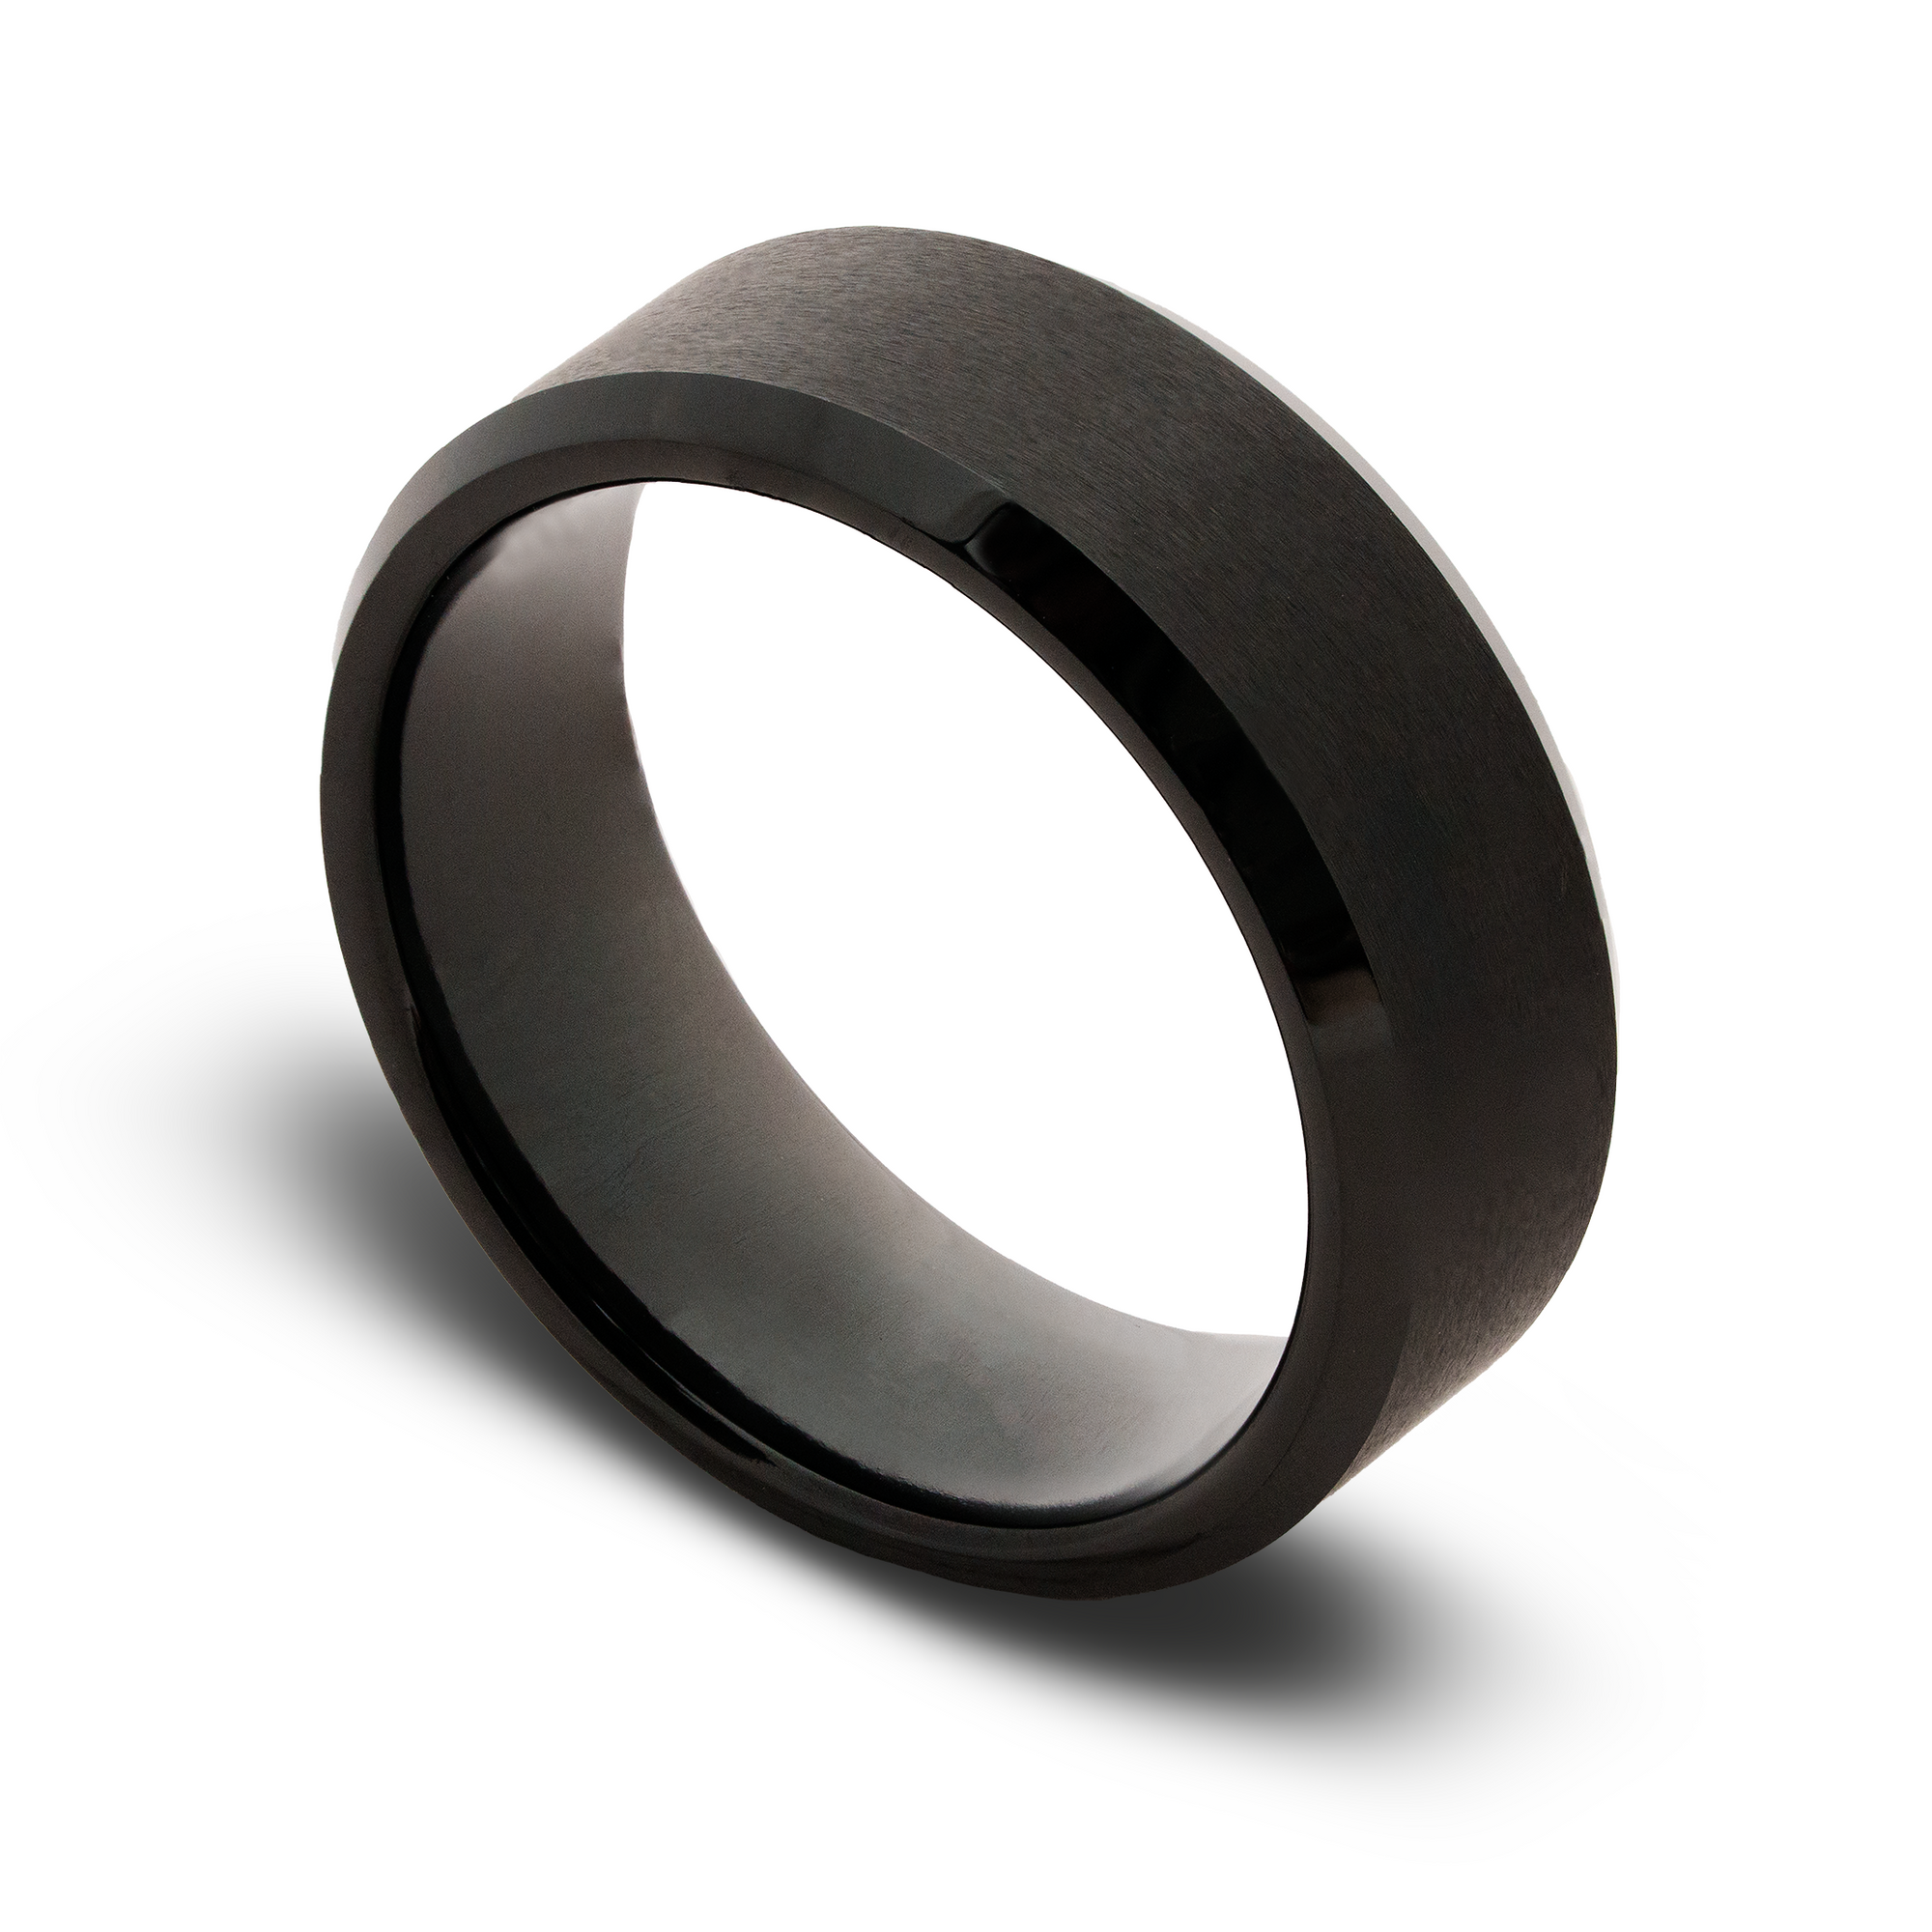 The “Eclipse” Ring